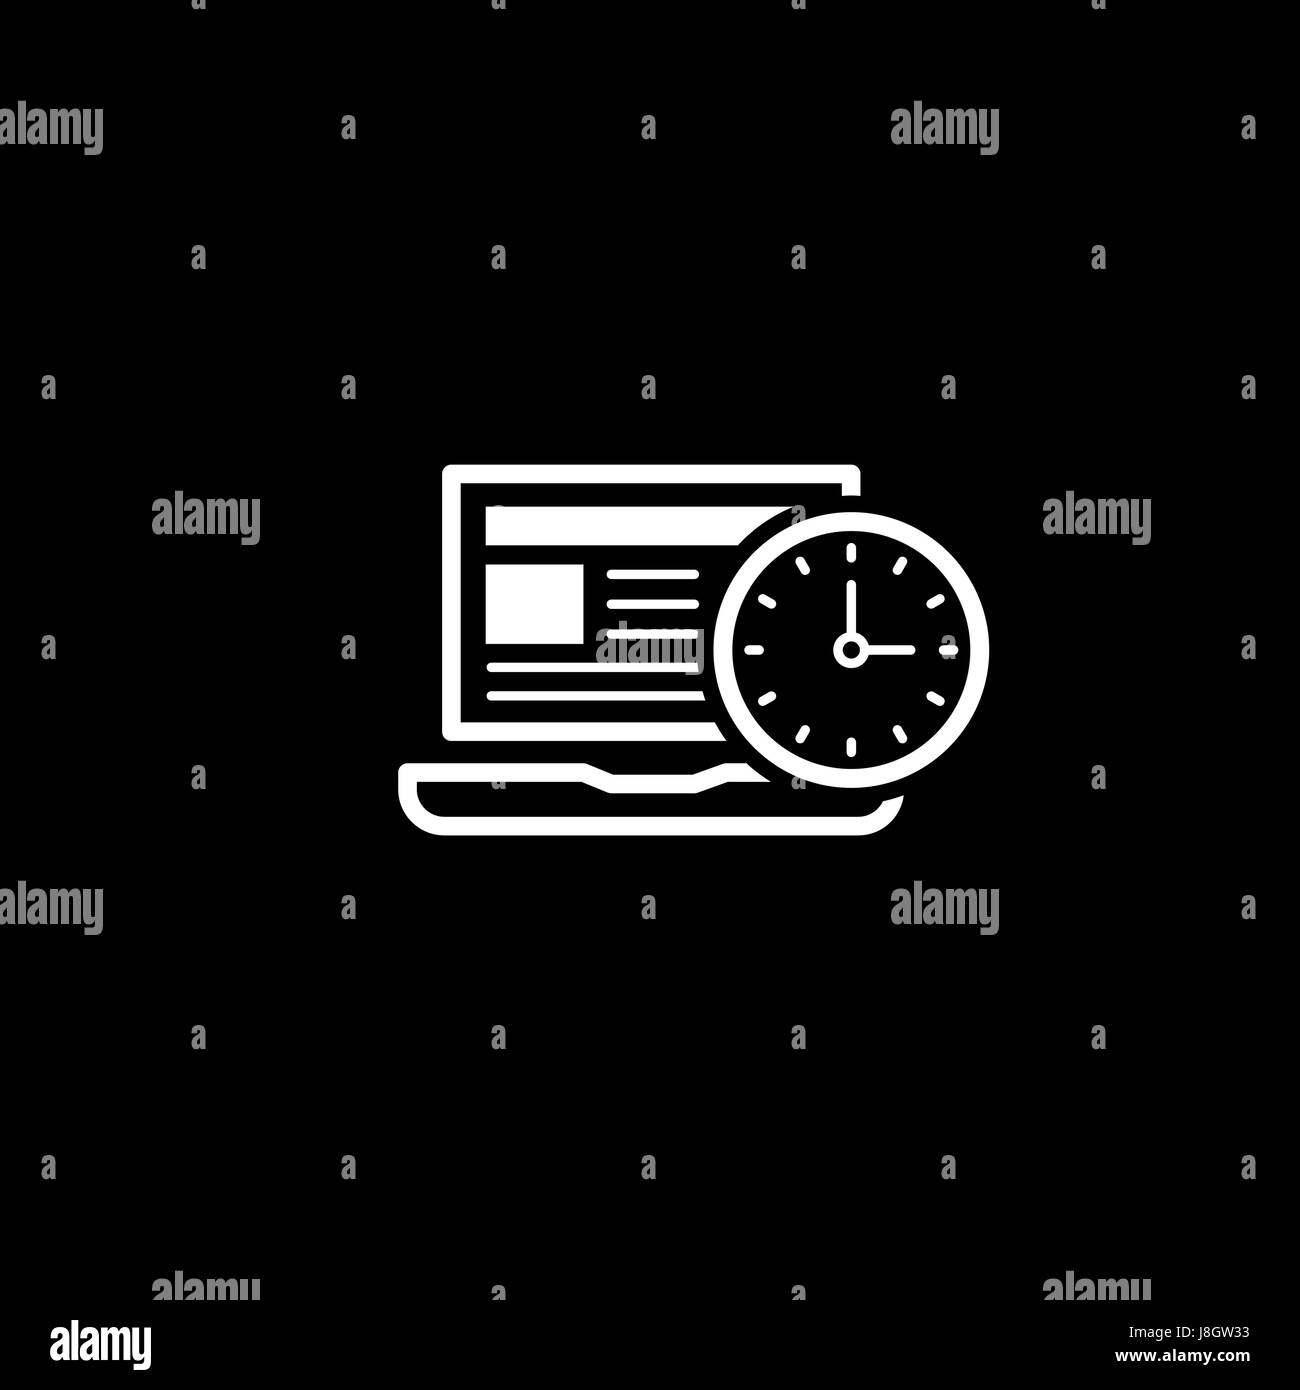 Time Management Icon. Business Concept. Flat Design. Stock Vector